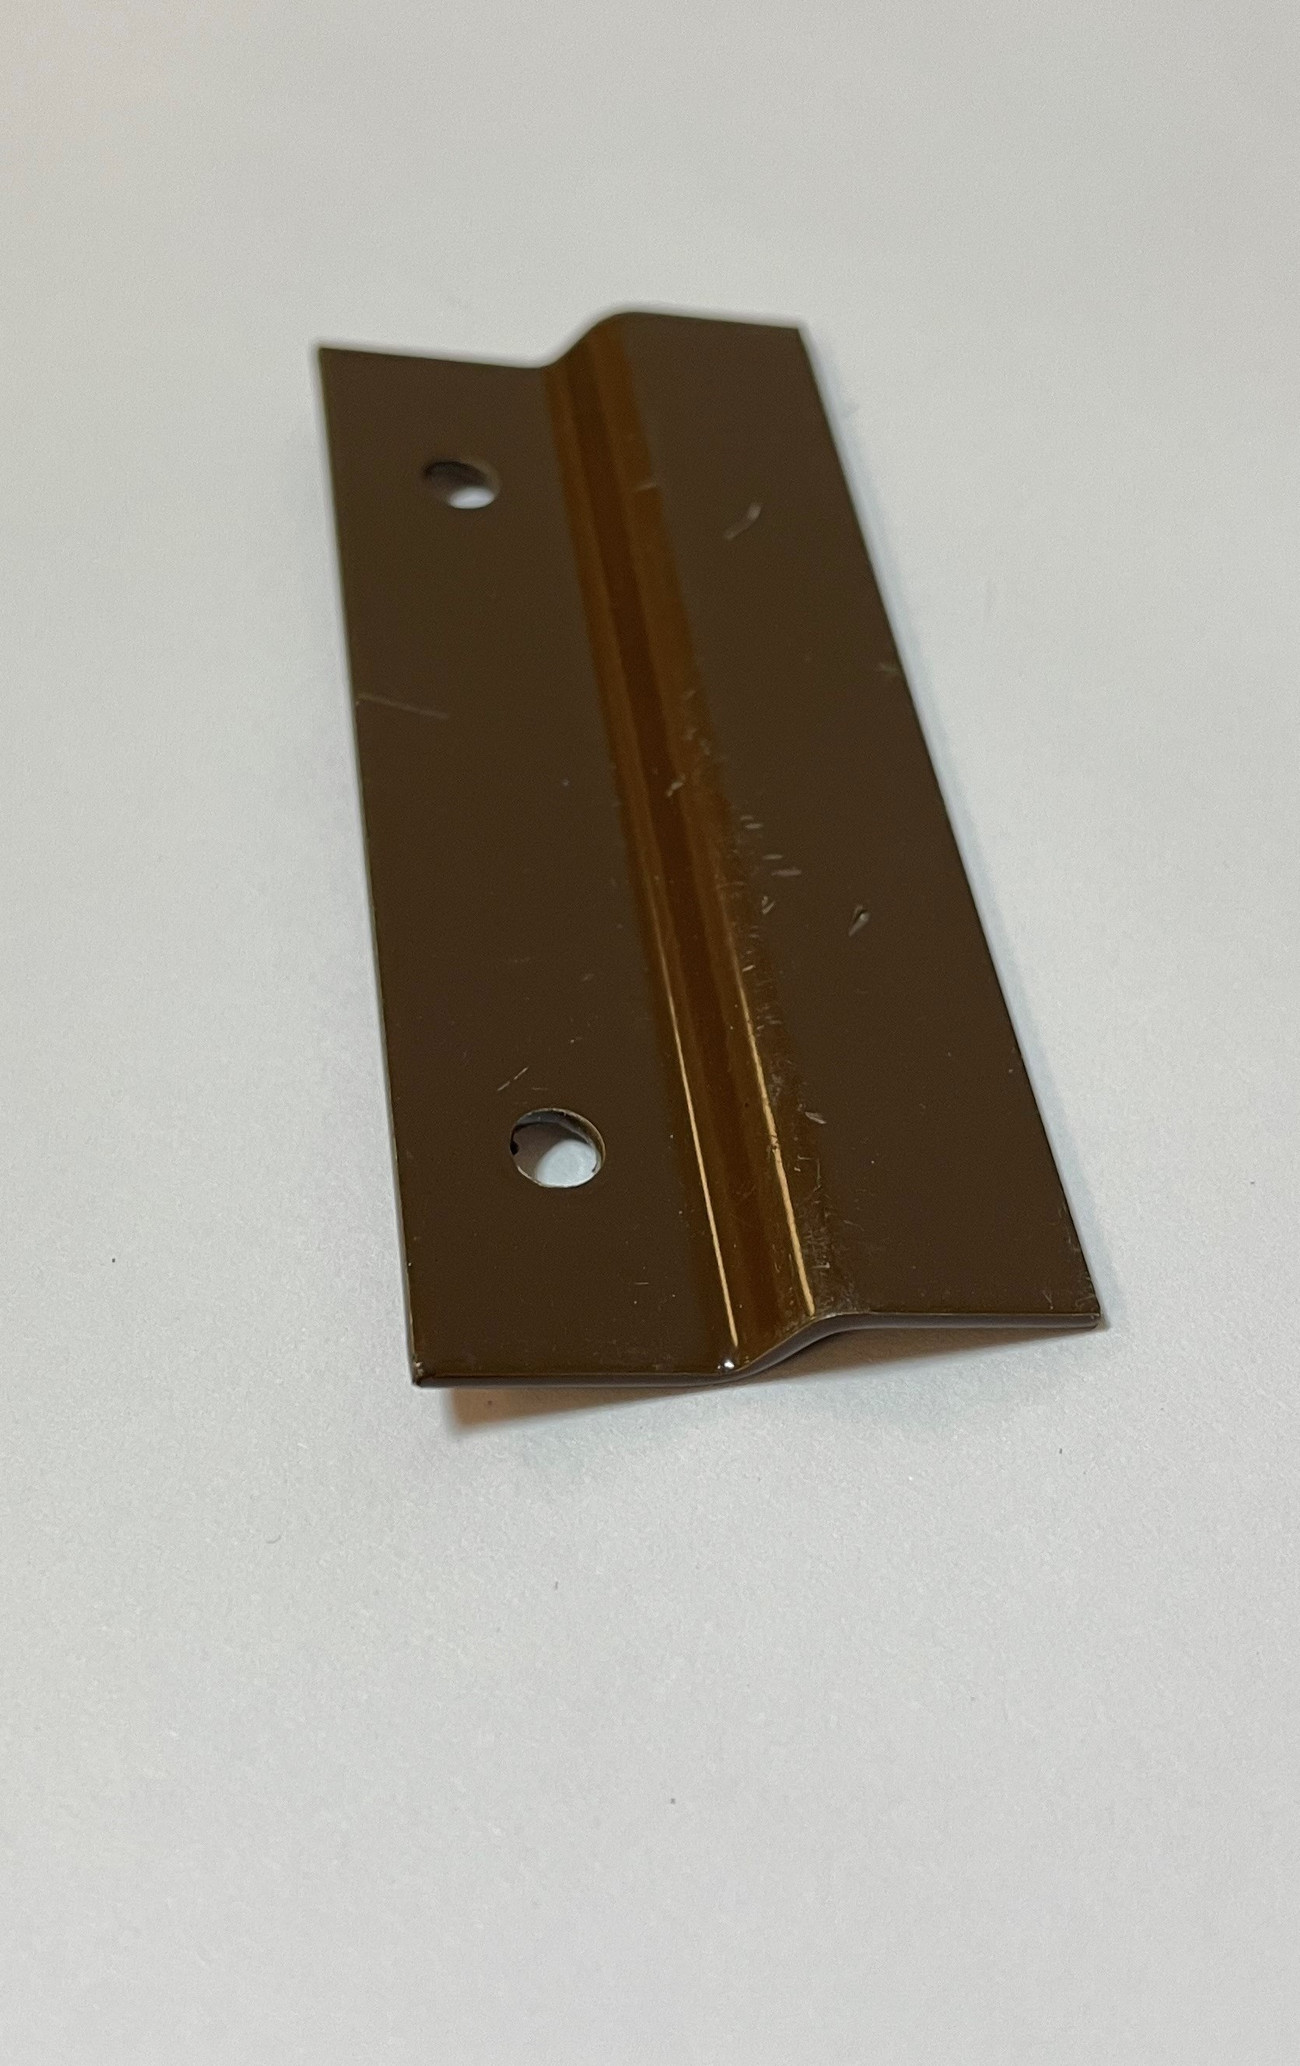 Brown Bead Bracket. Suitable for areas such as doorways or conservatories where the hanging location is brown. these brackets will blend in so they will not have to be removed between seasons. All fixtures and fittings are supplied in the bracket pack to allow you to easily install.